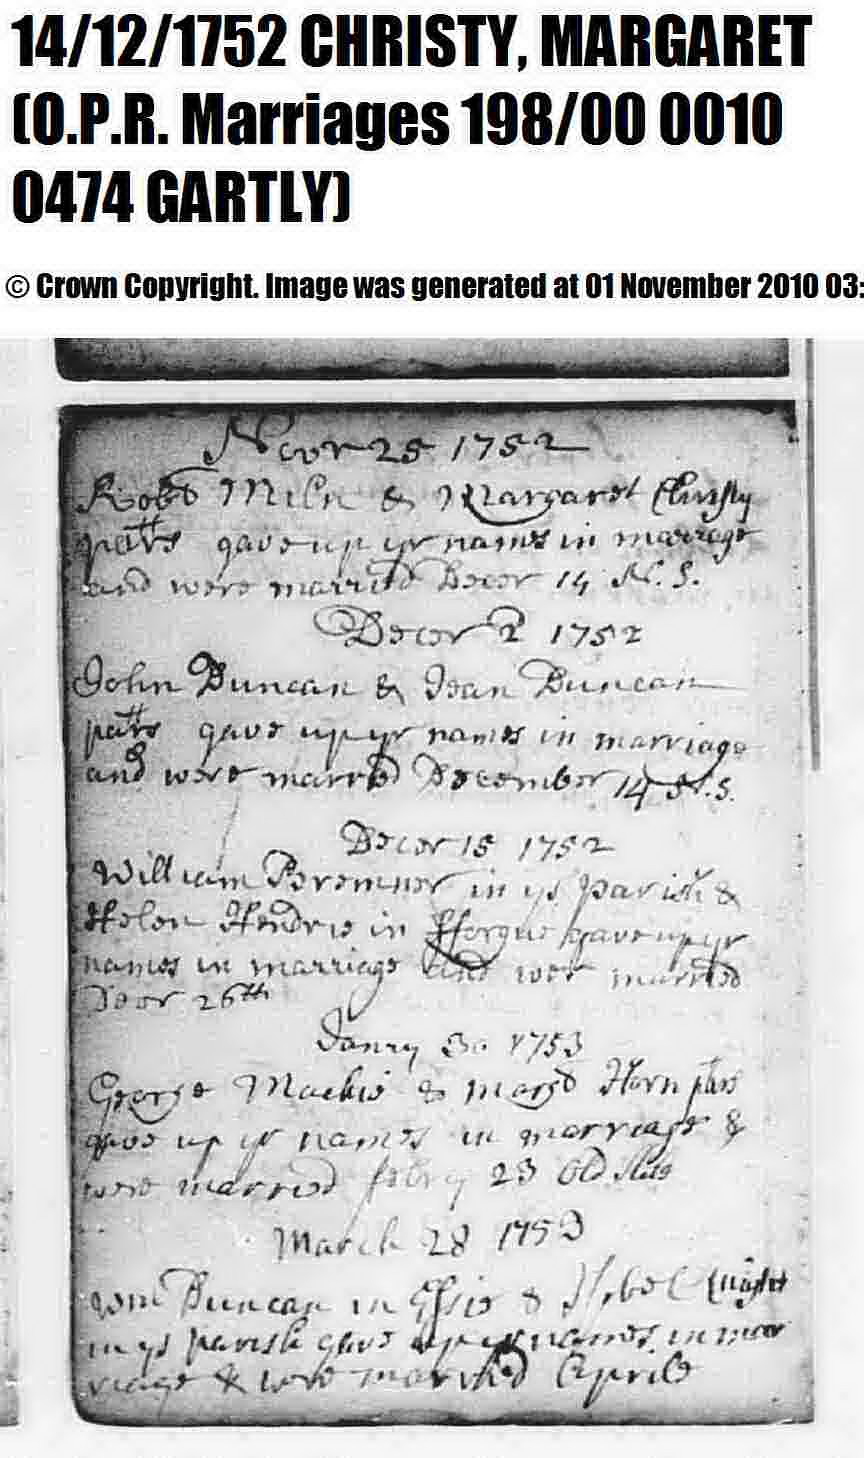 Robert Miln and Margaret Christy Marriage 1752, December 14, 1752, Linked To: <a href='i17357.html' >Robert Milne 🔗</a>